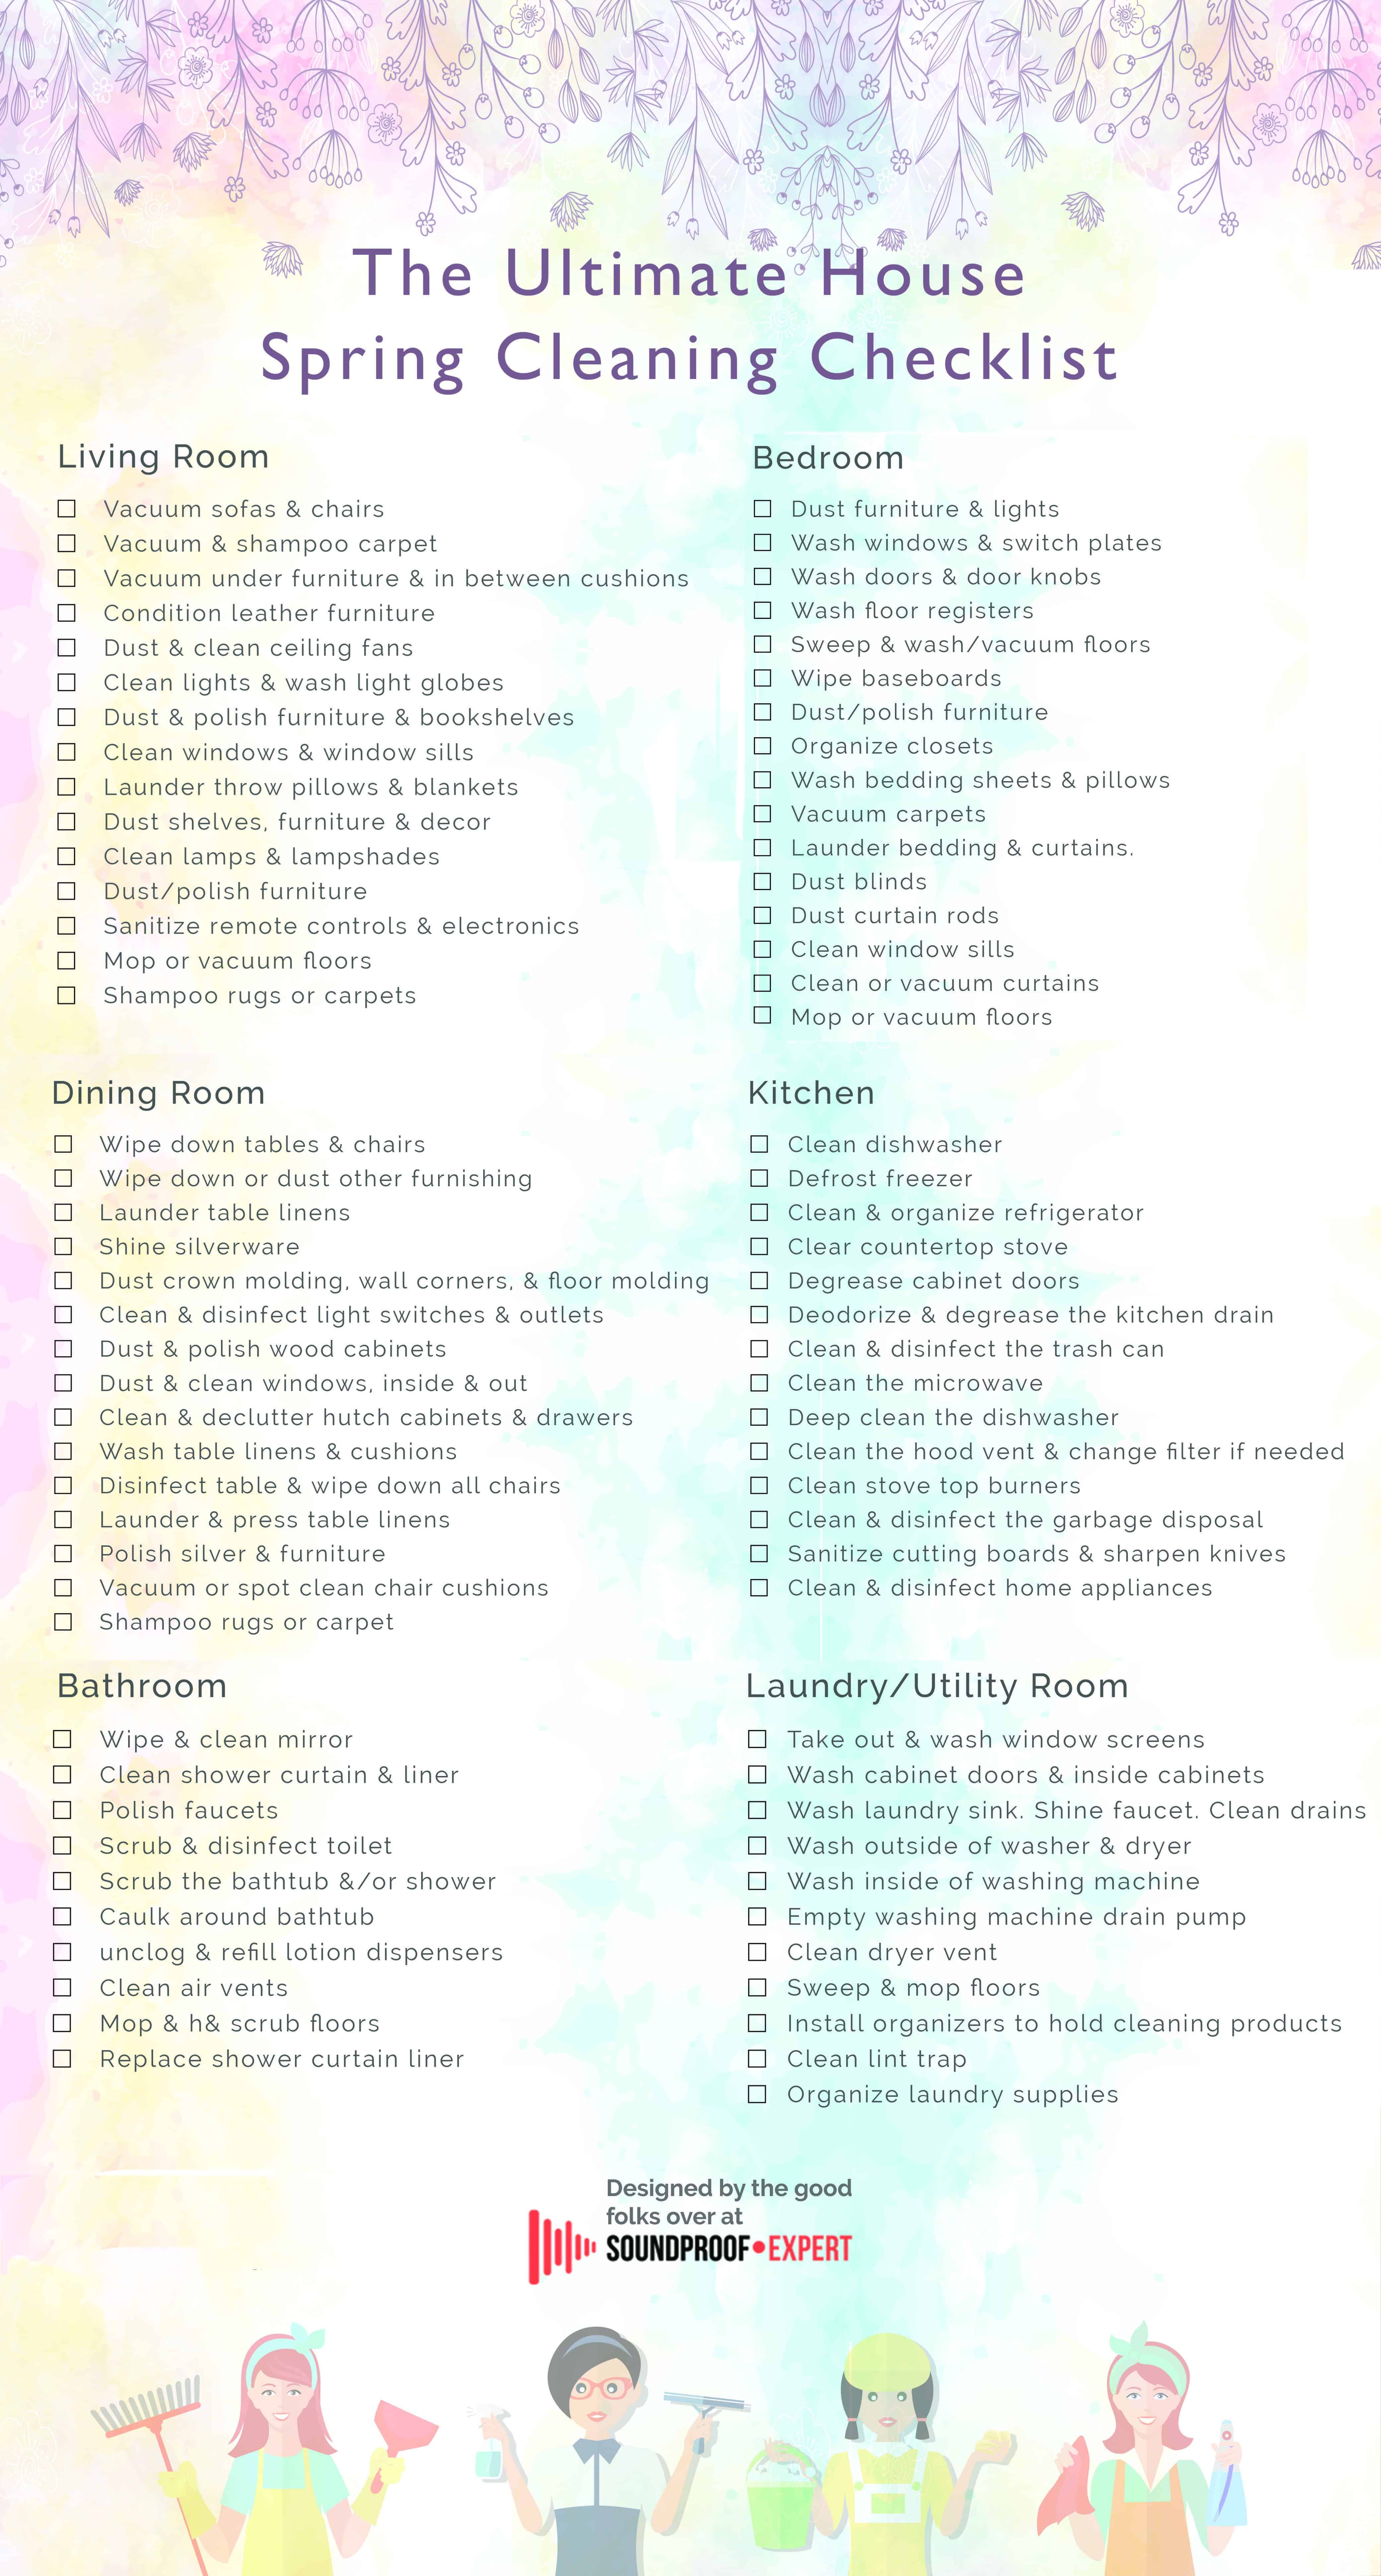 Kitchen Cleaning Schedule Template from soundproof.expert